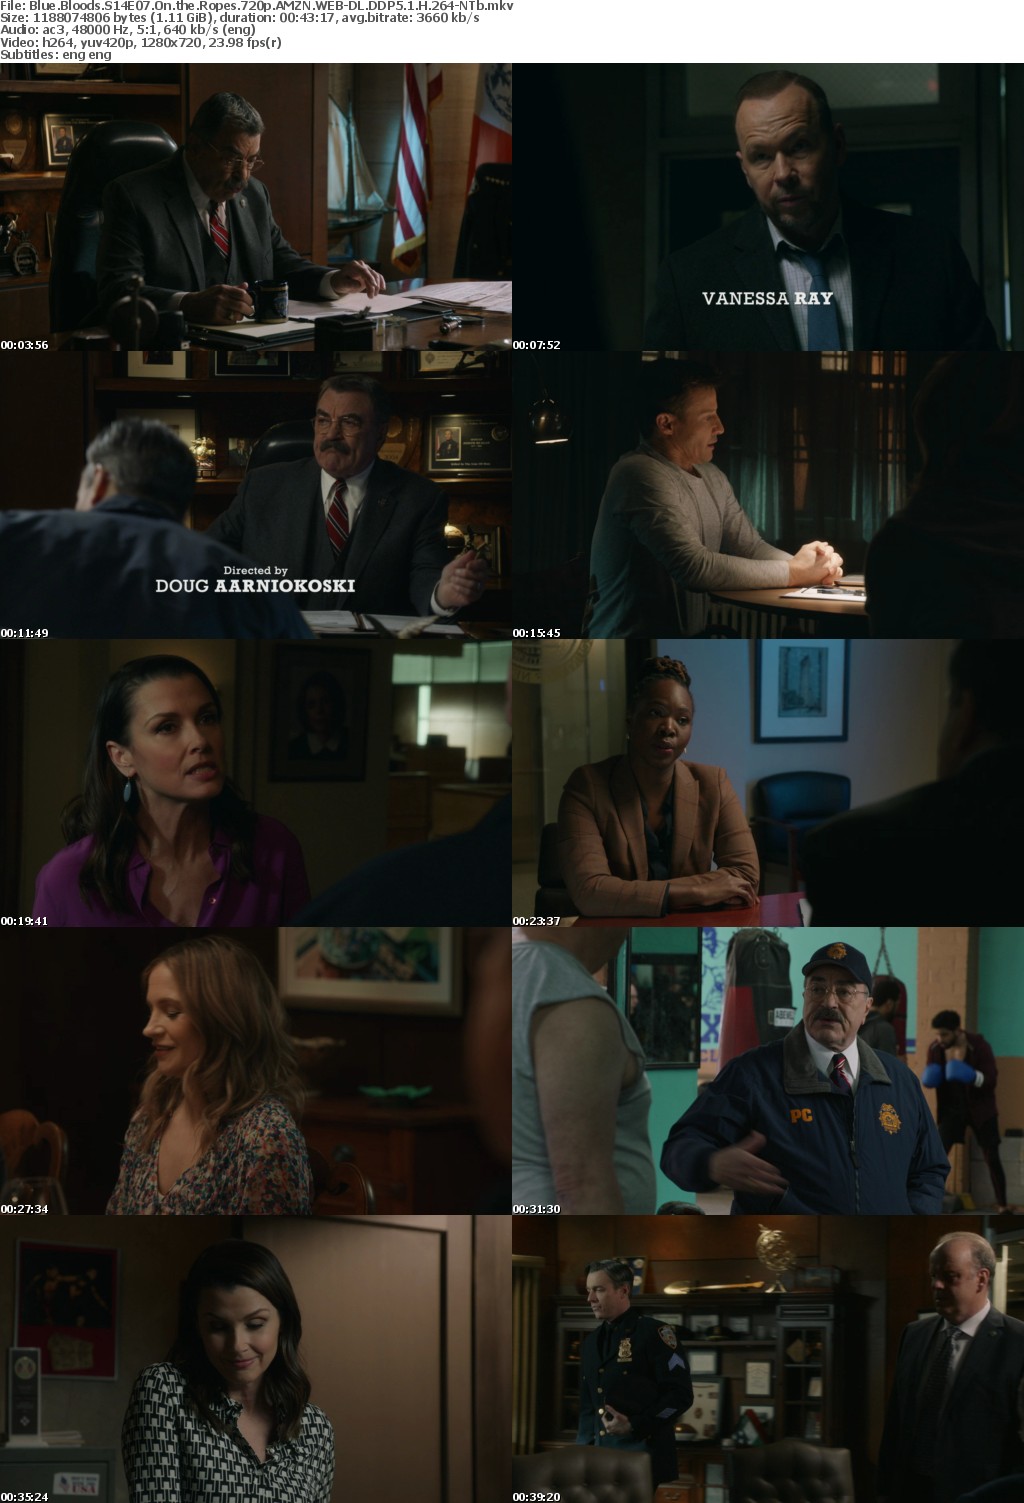 Blue Bloods S14E07 On the Ropes 720p AMZN WEB-DL DDP5 1 H 264-NTb